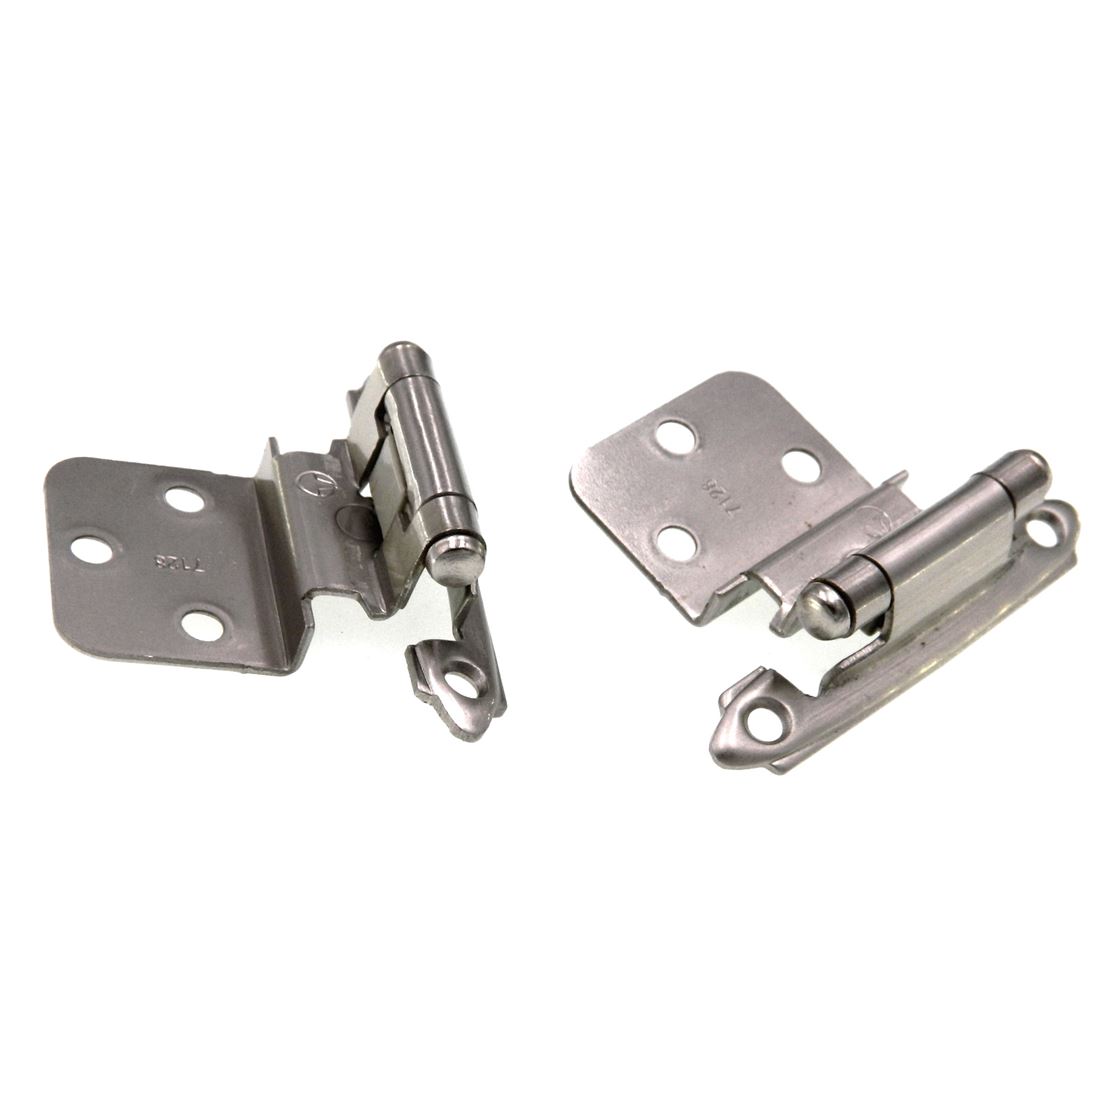 Inset Cabinet Hinges